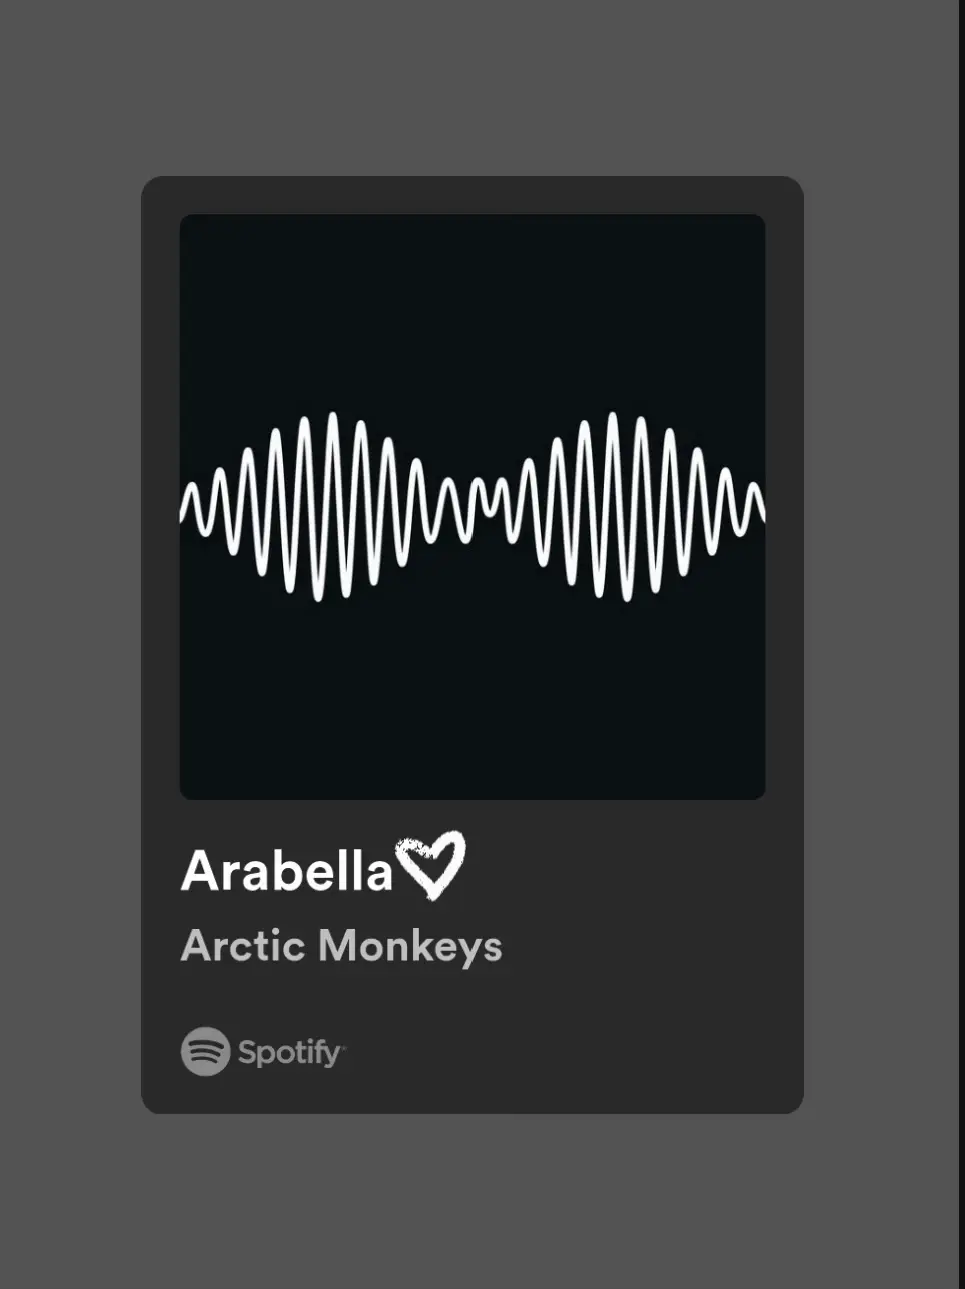  A Spotify ad for Arctic Monkeys.